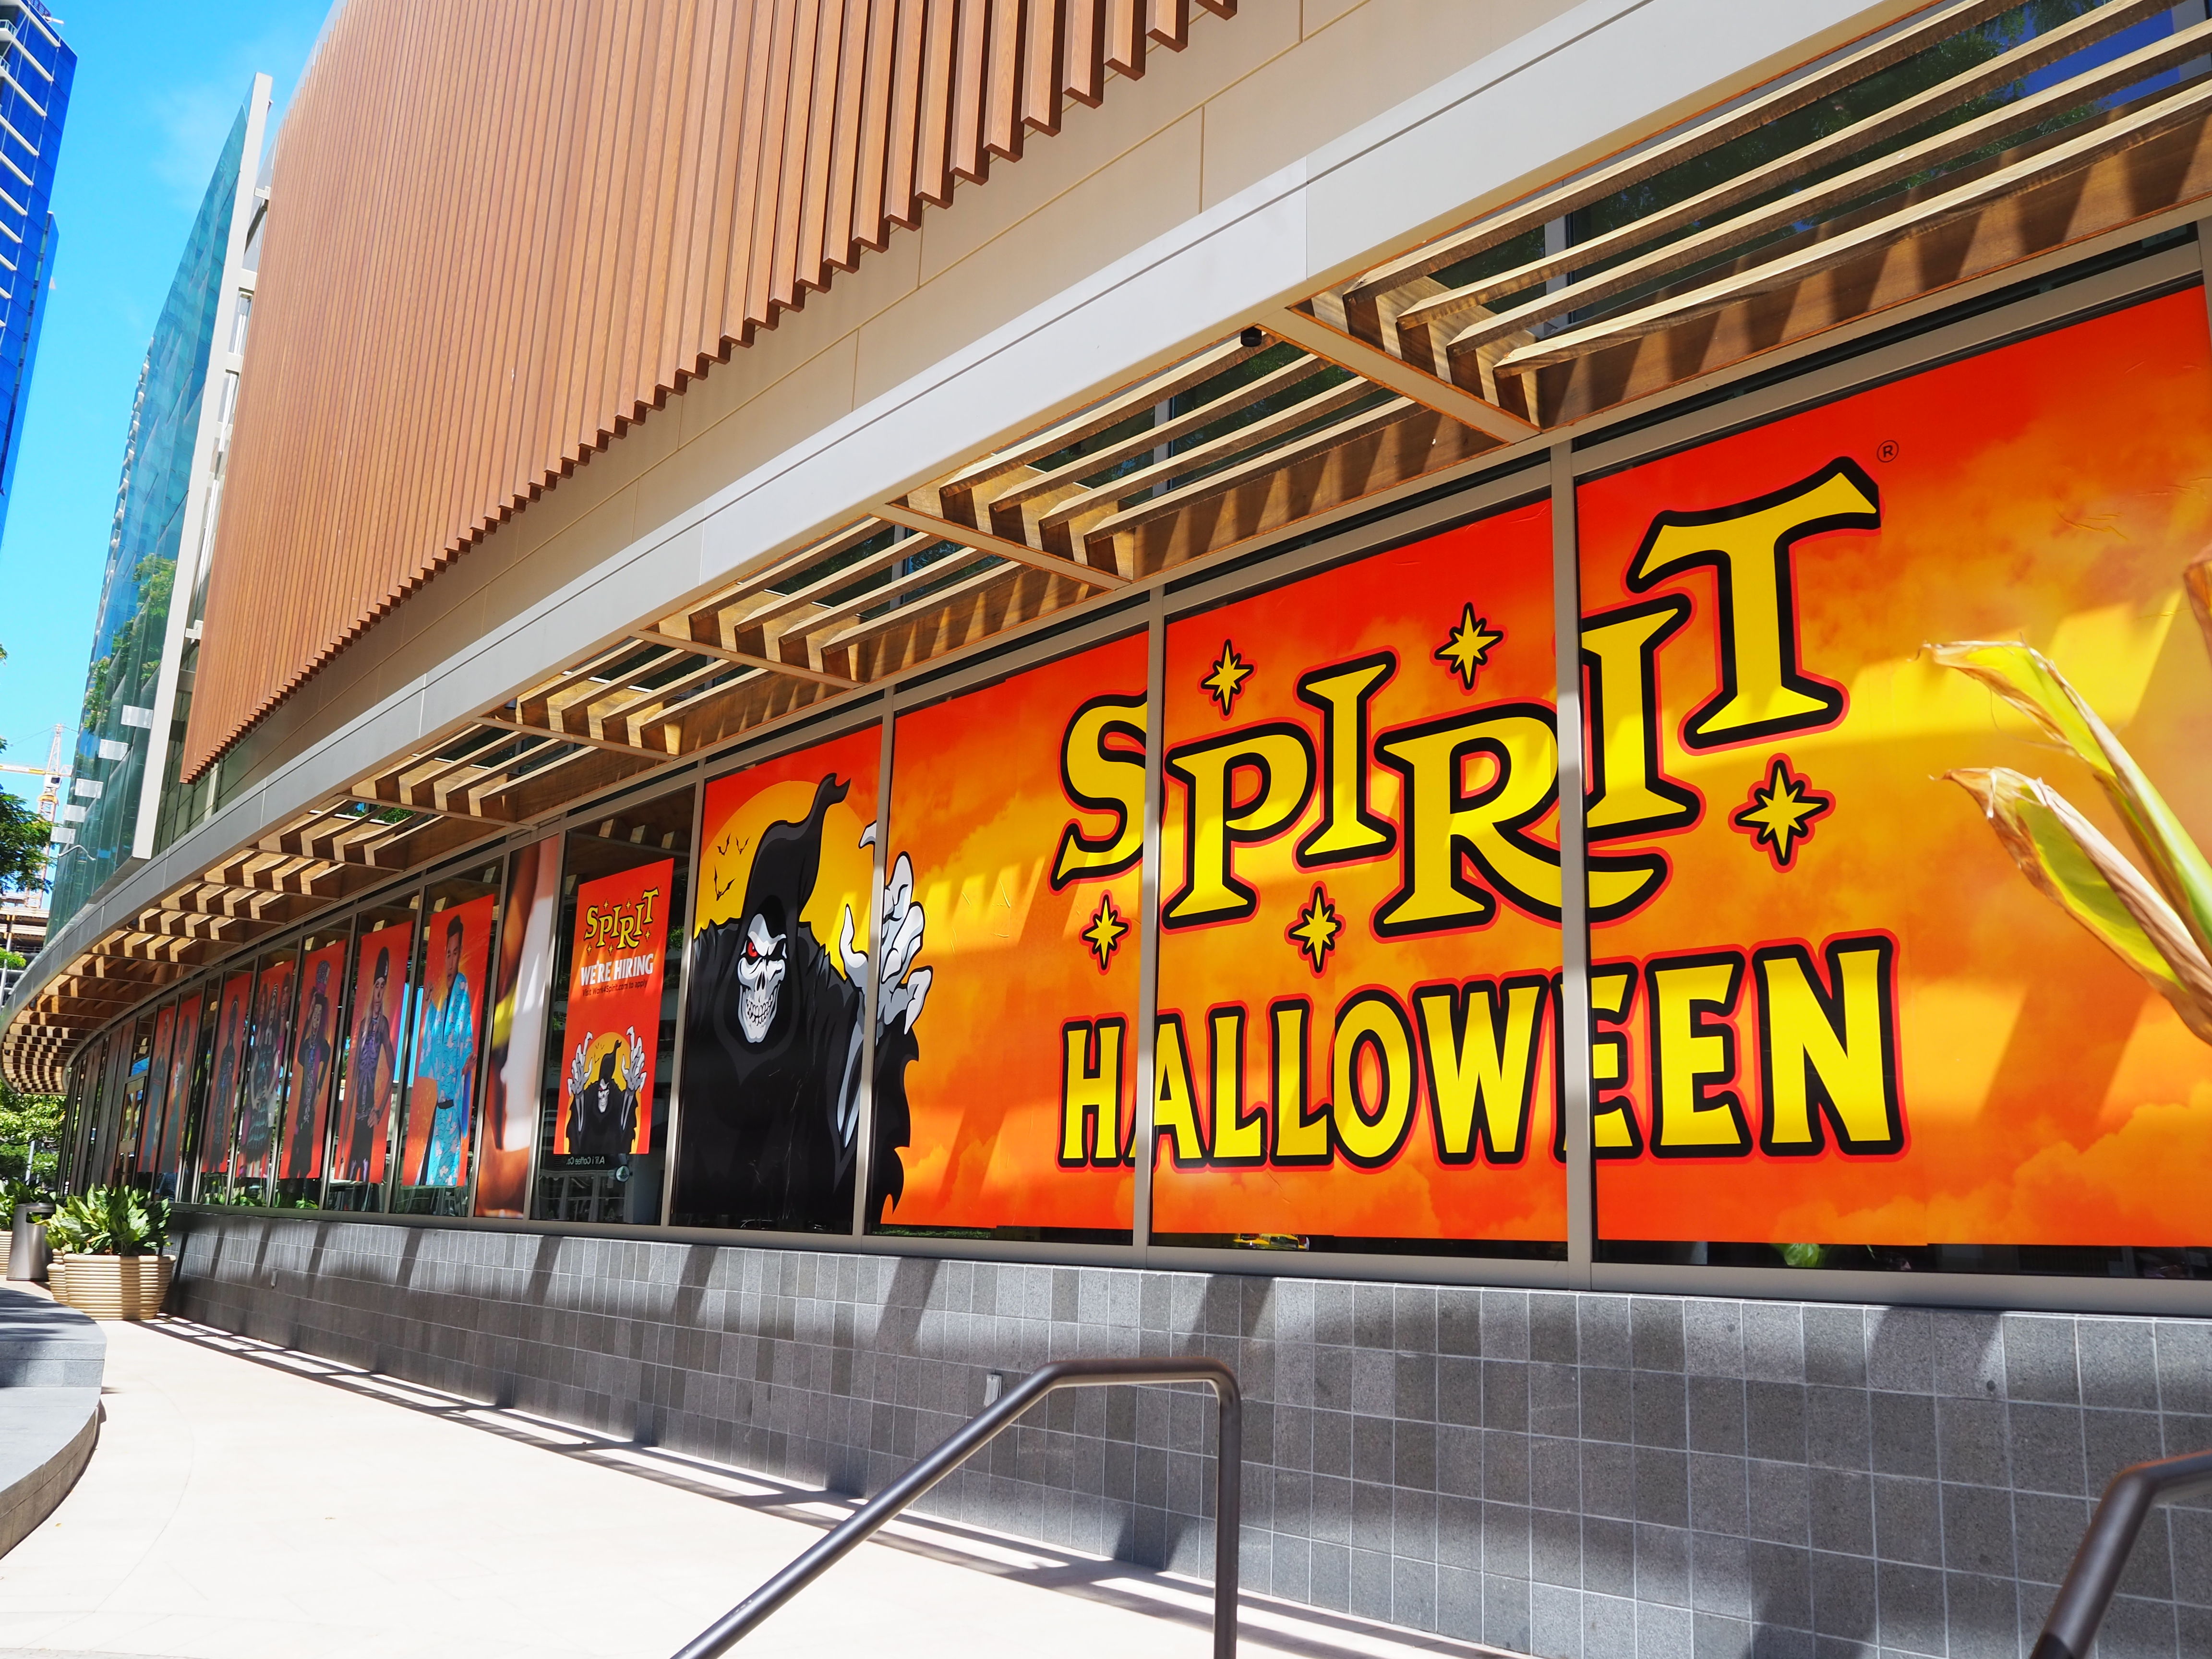 Spirit Halloween offers scary good costumes and decorations through November 16